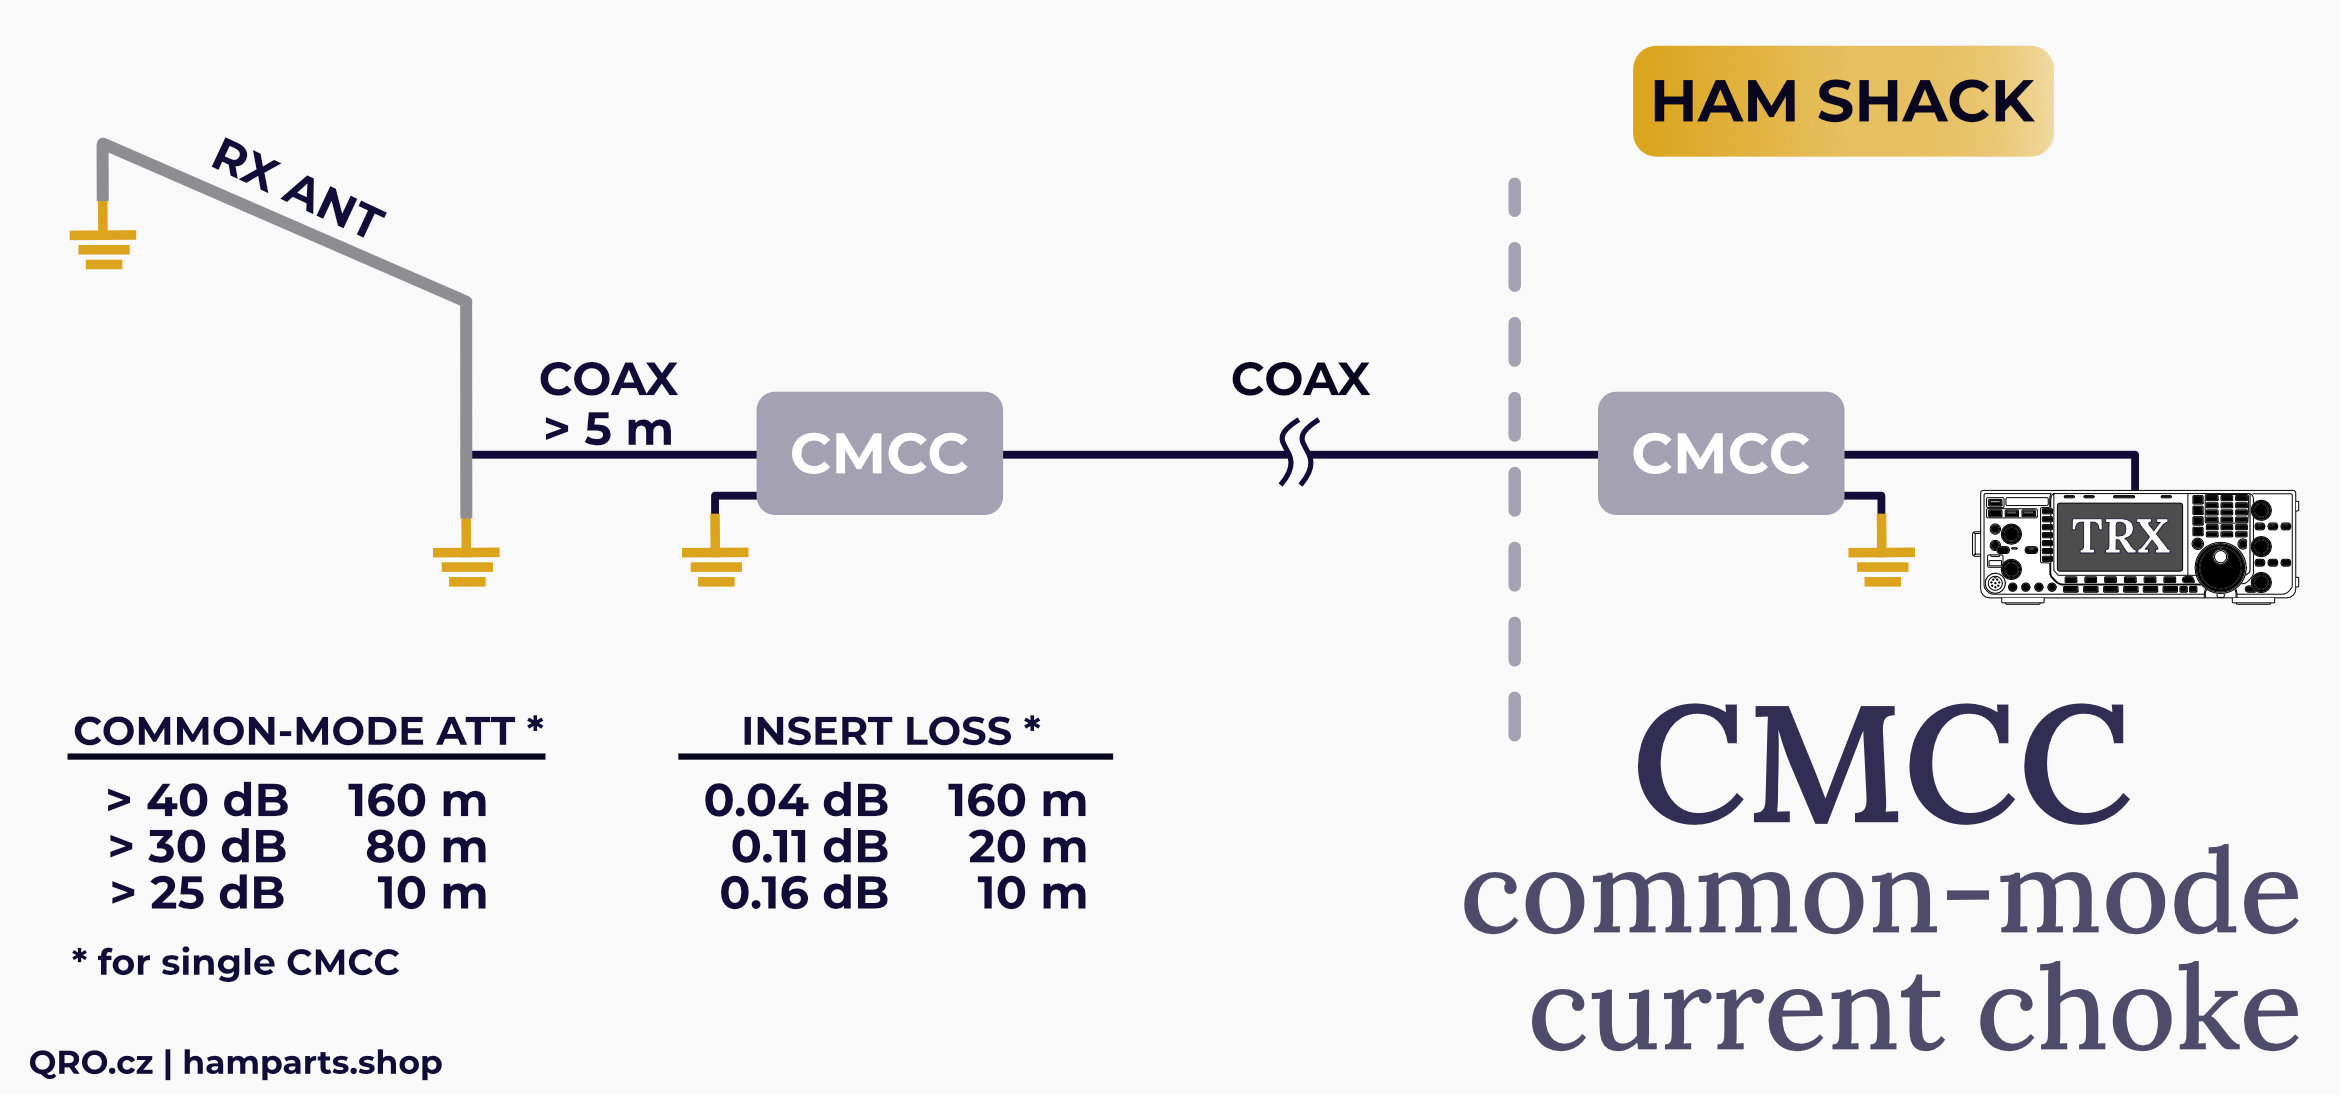 cmcc common-mode current choke to ham shack by qro.cz hamparts.shop